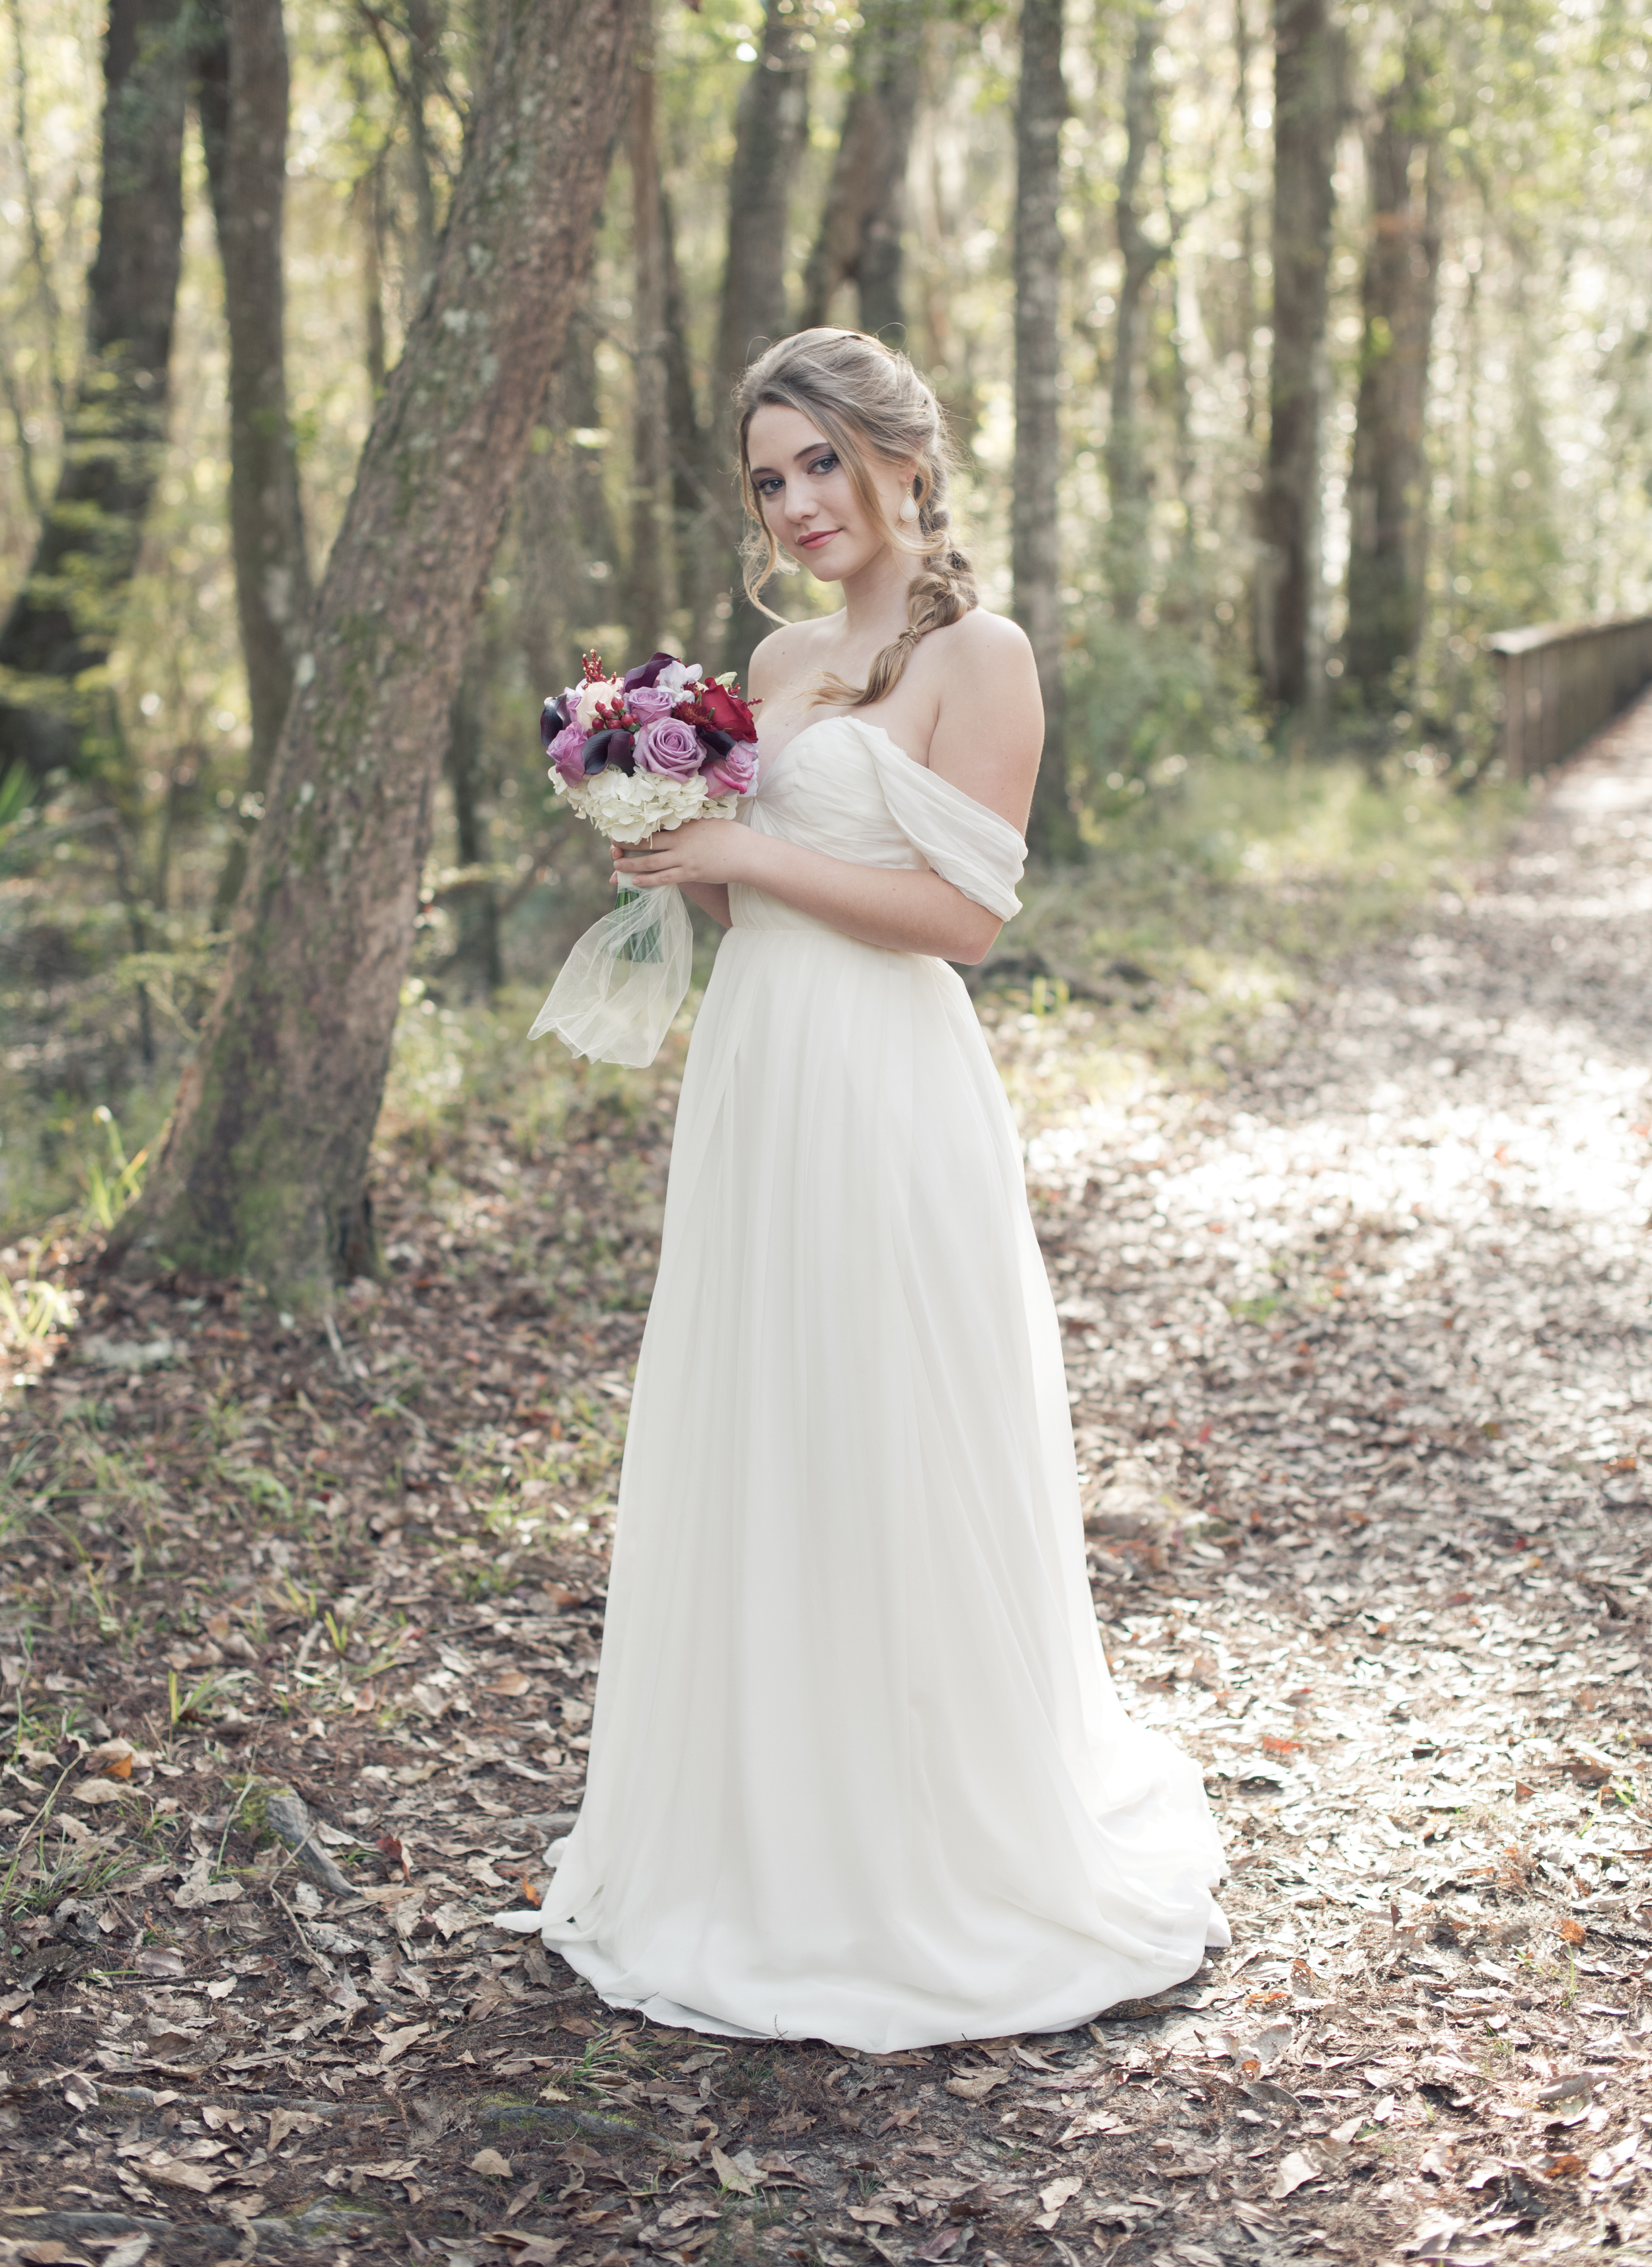 5-D-Photography-lafayette-sarah-seven-off-the-shoulder-wedding-dress-Gardenias-hilton-head- Ogeechee-Canal-Trail-ivory-and-beau-bridal-boutique-savannah-wedding-dresses-savannah-bridal-boutique-savannah-weddings-hilton-head-bridal-5.jpg